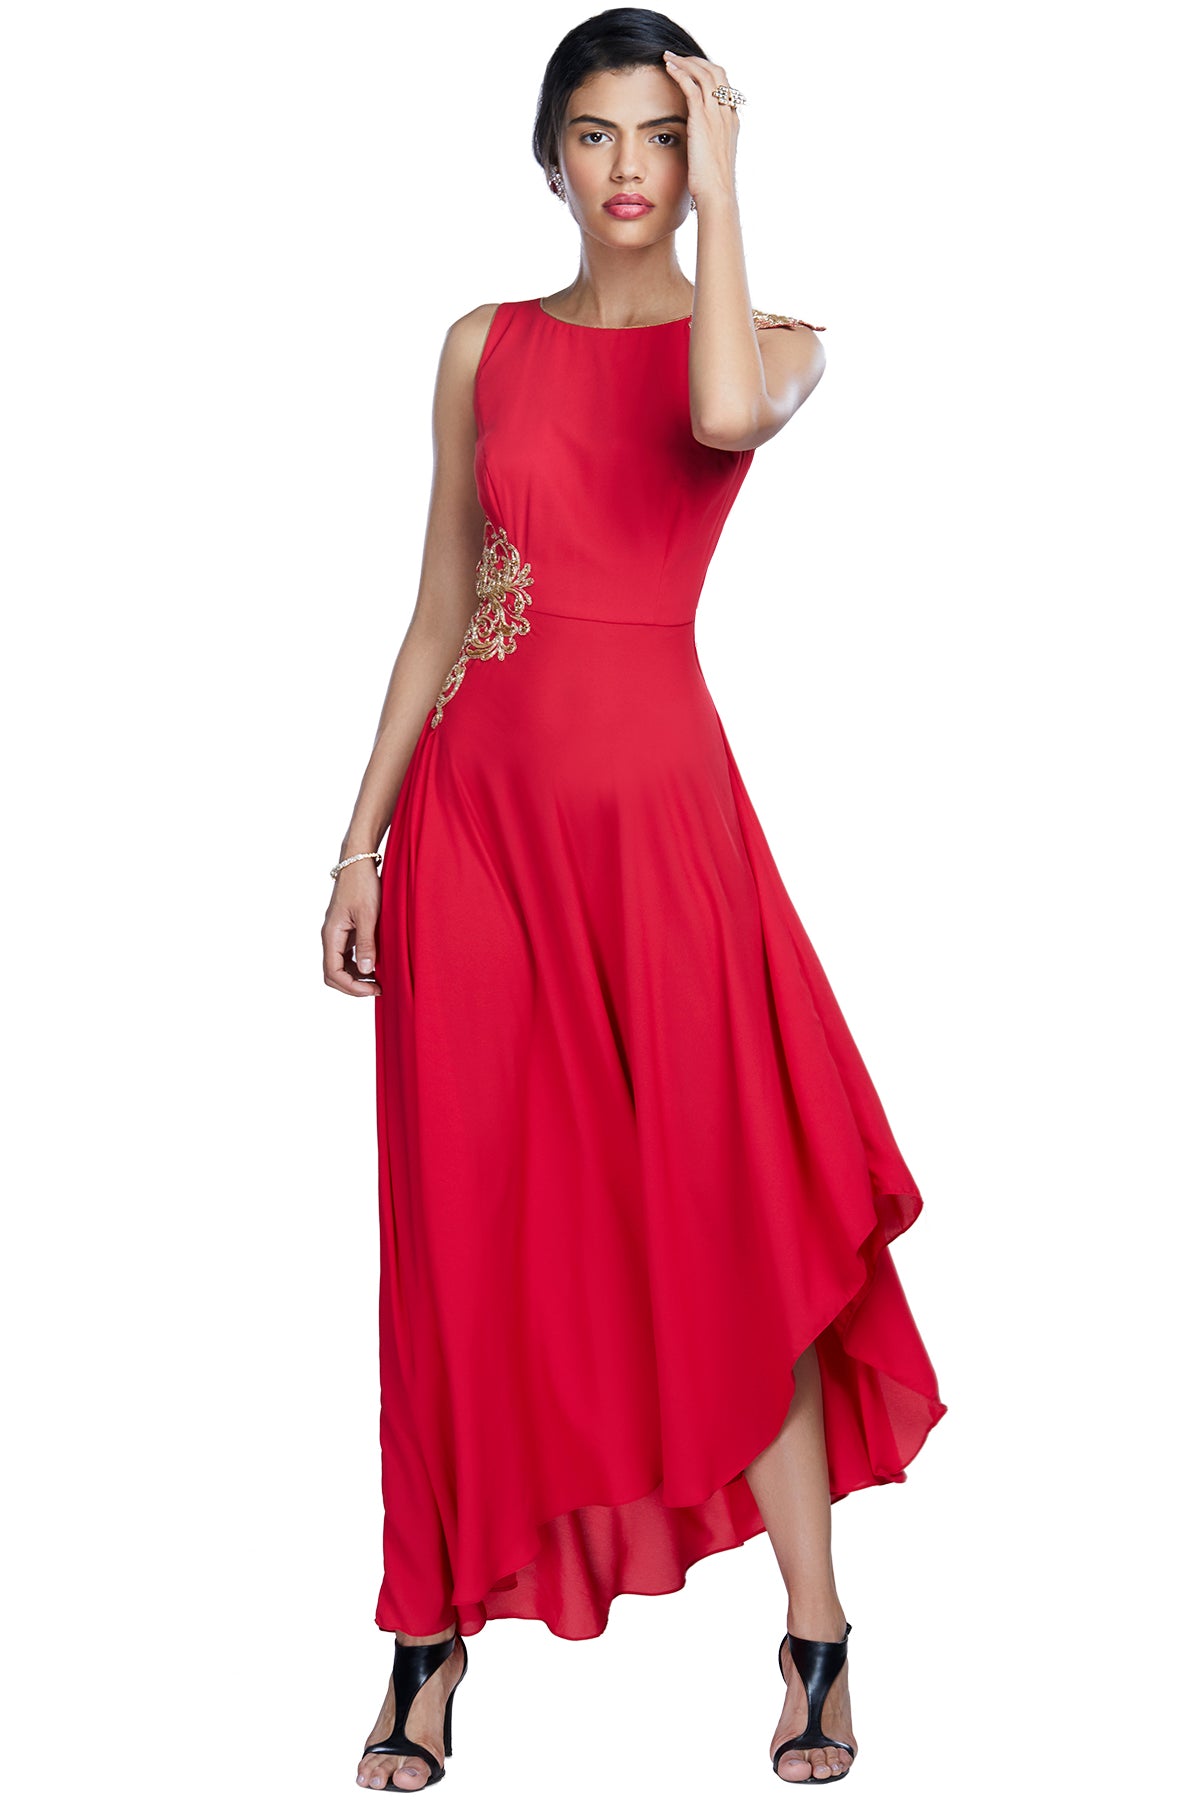 Red asymmetrical gown with butterfly embroidery on shoulder and waist.